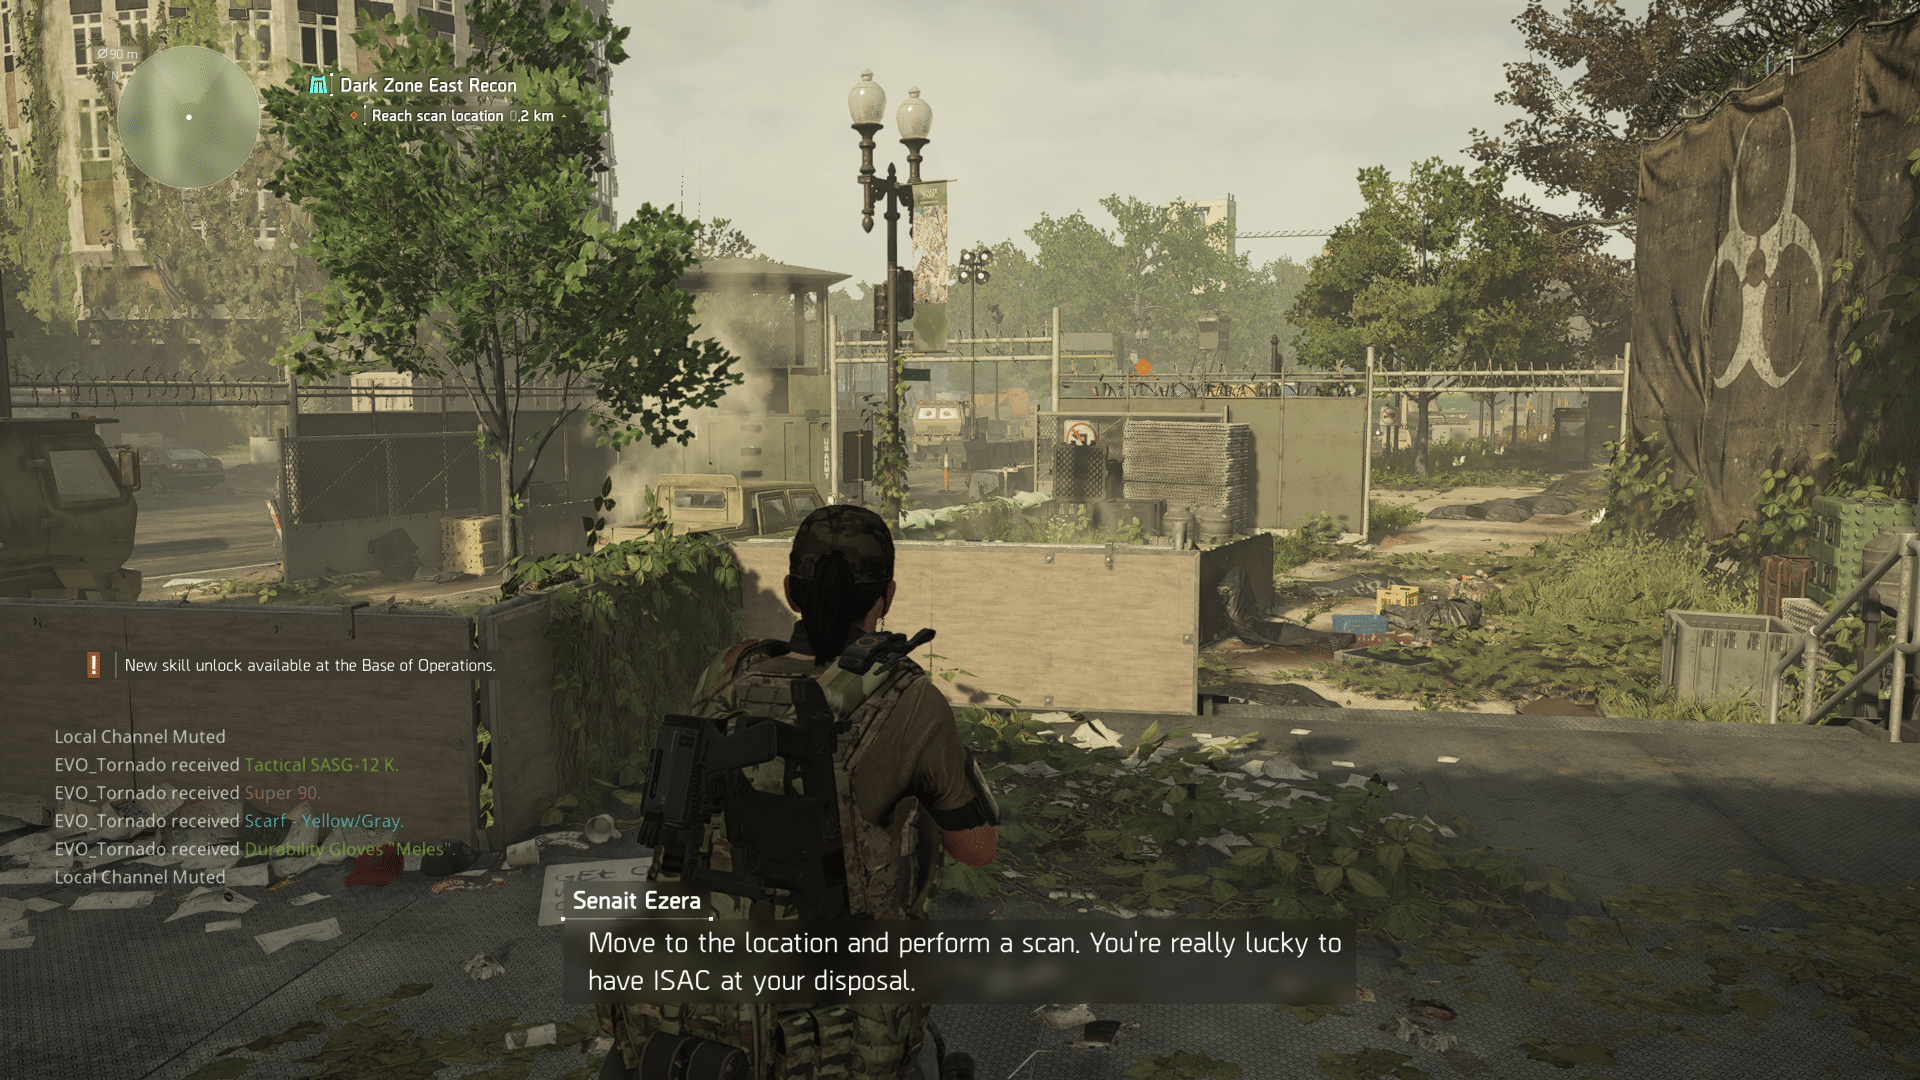 TheDivision2 4 1 2019 7 52 13 PM 380